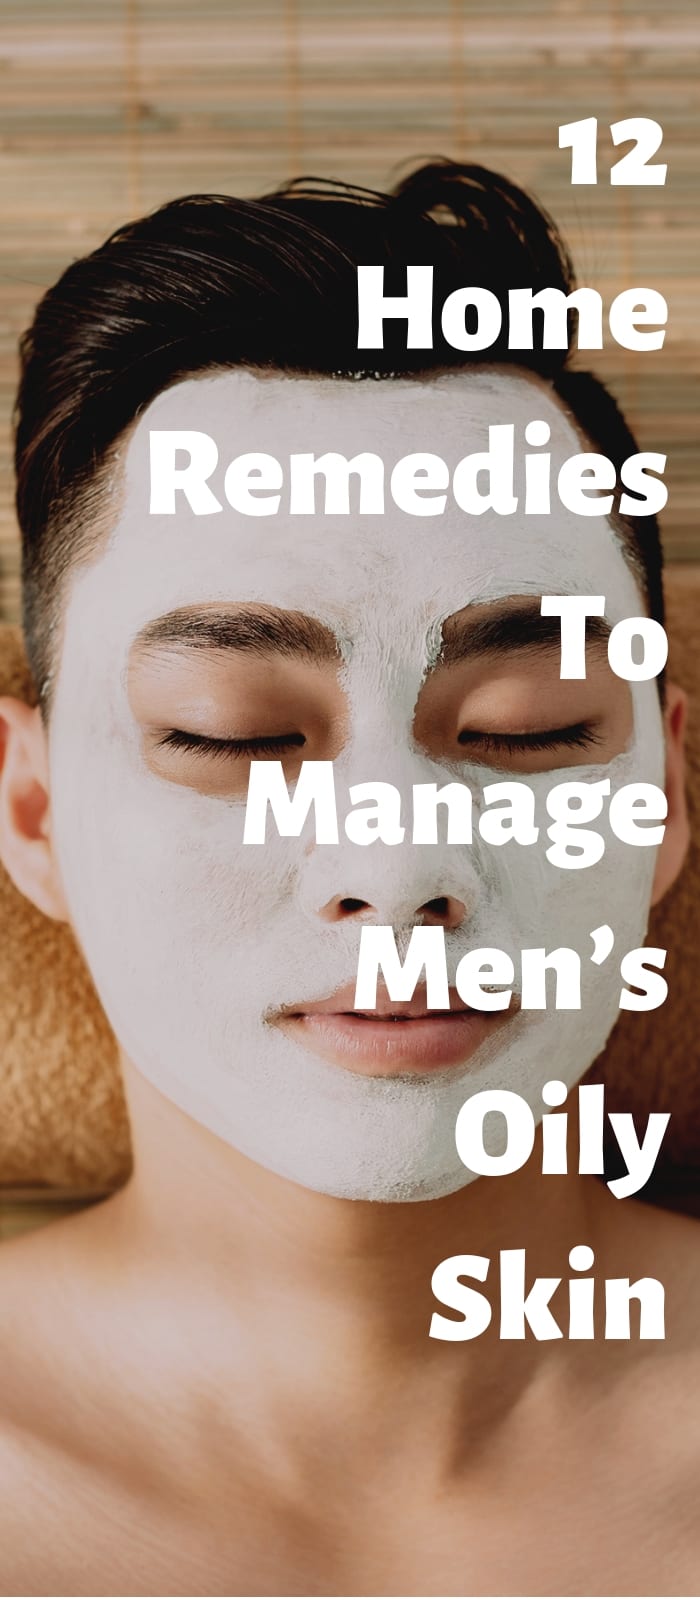 12 Home Remedies To Manage Men’s Oily Skin!